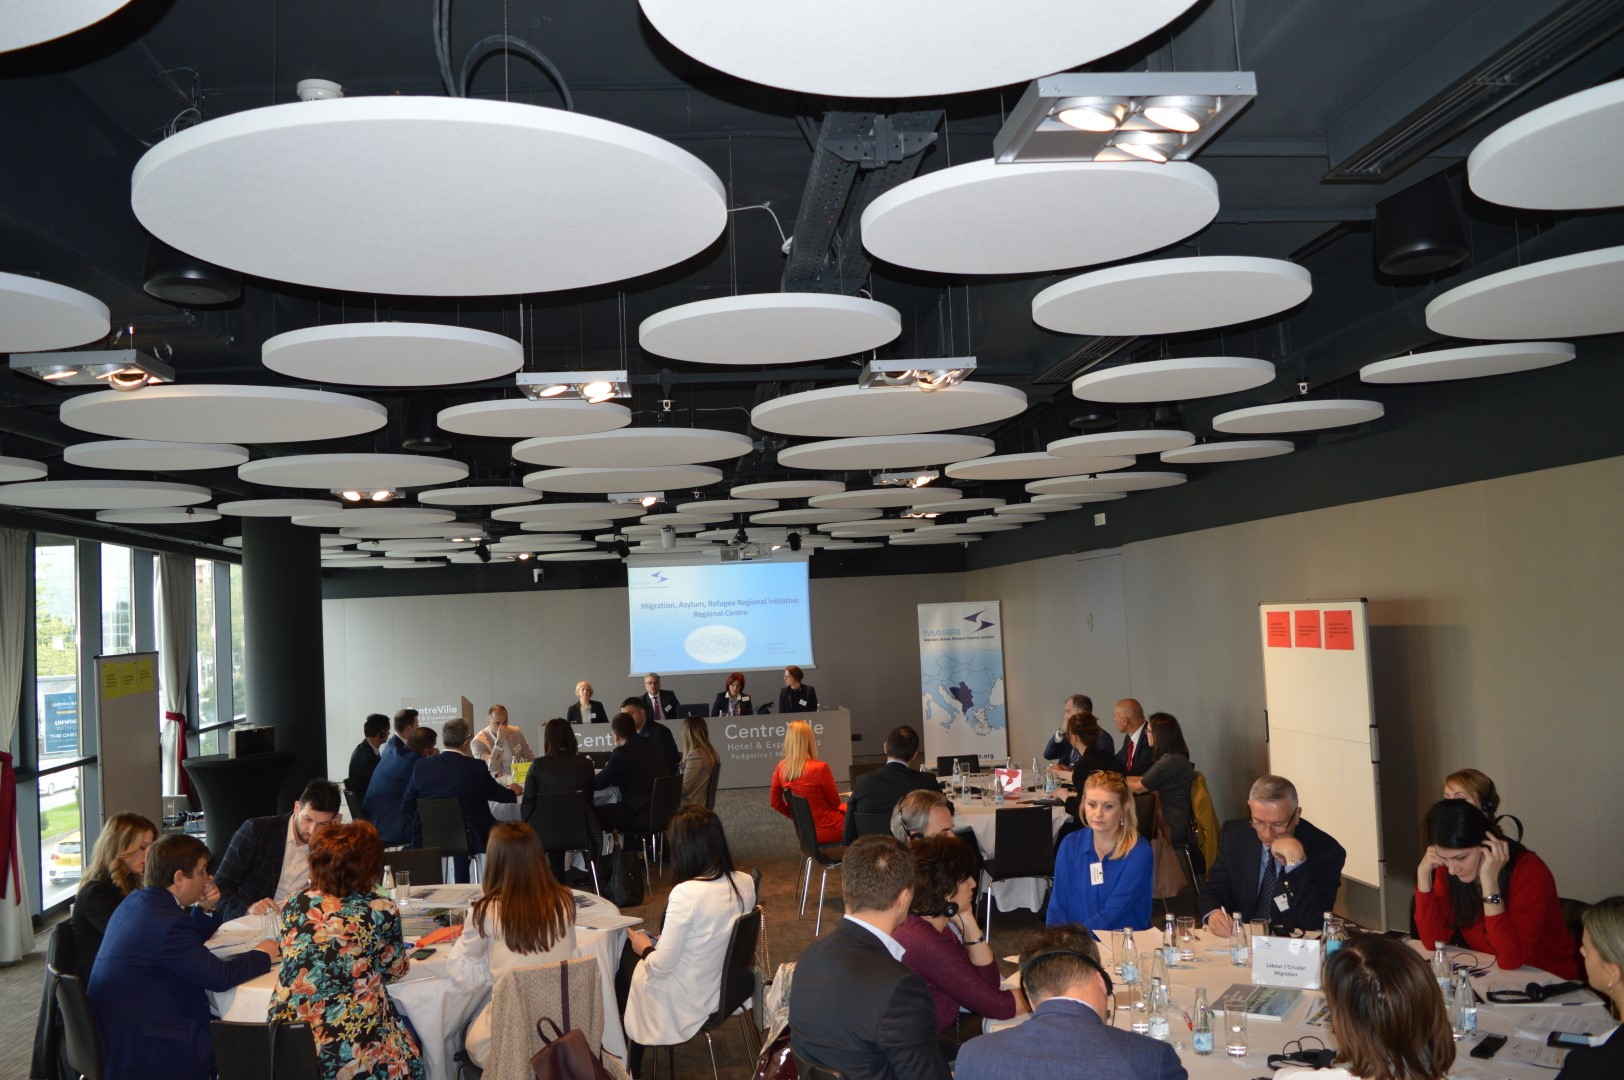 12 April 2019 – Workshop on “Strengthening regional dialogue and cooperation on migration” in Podgorica